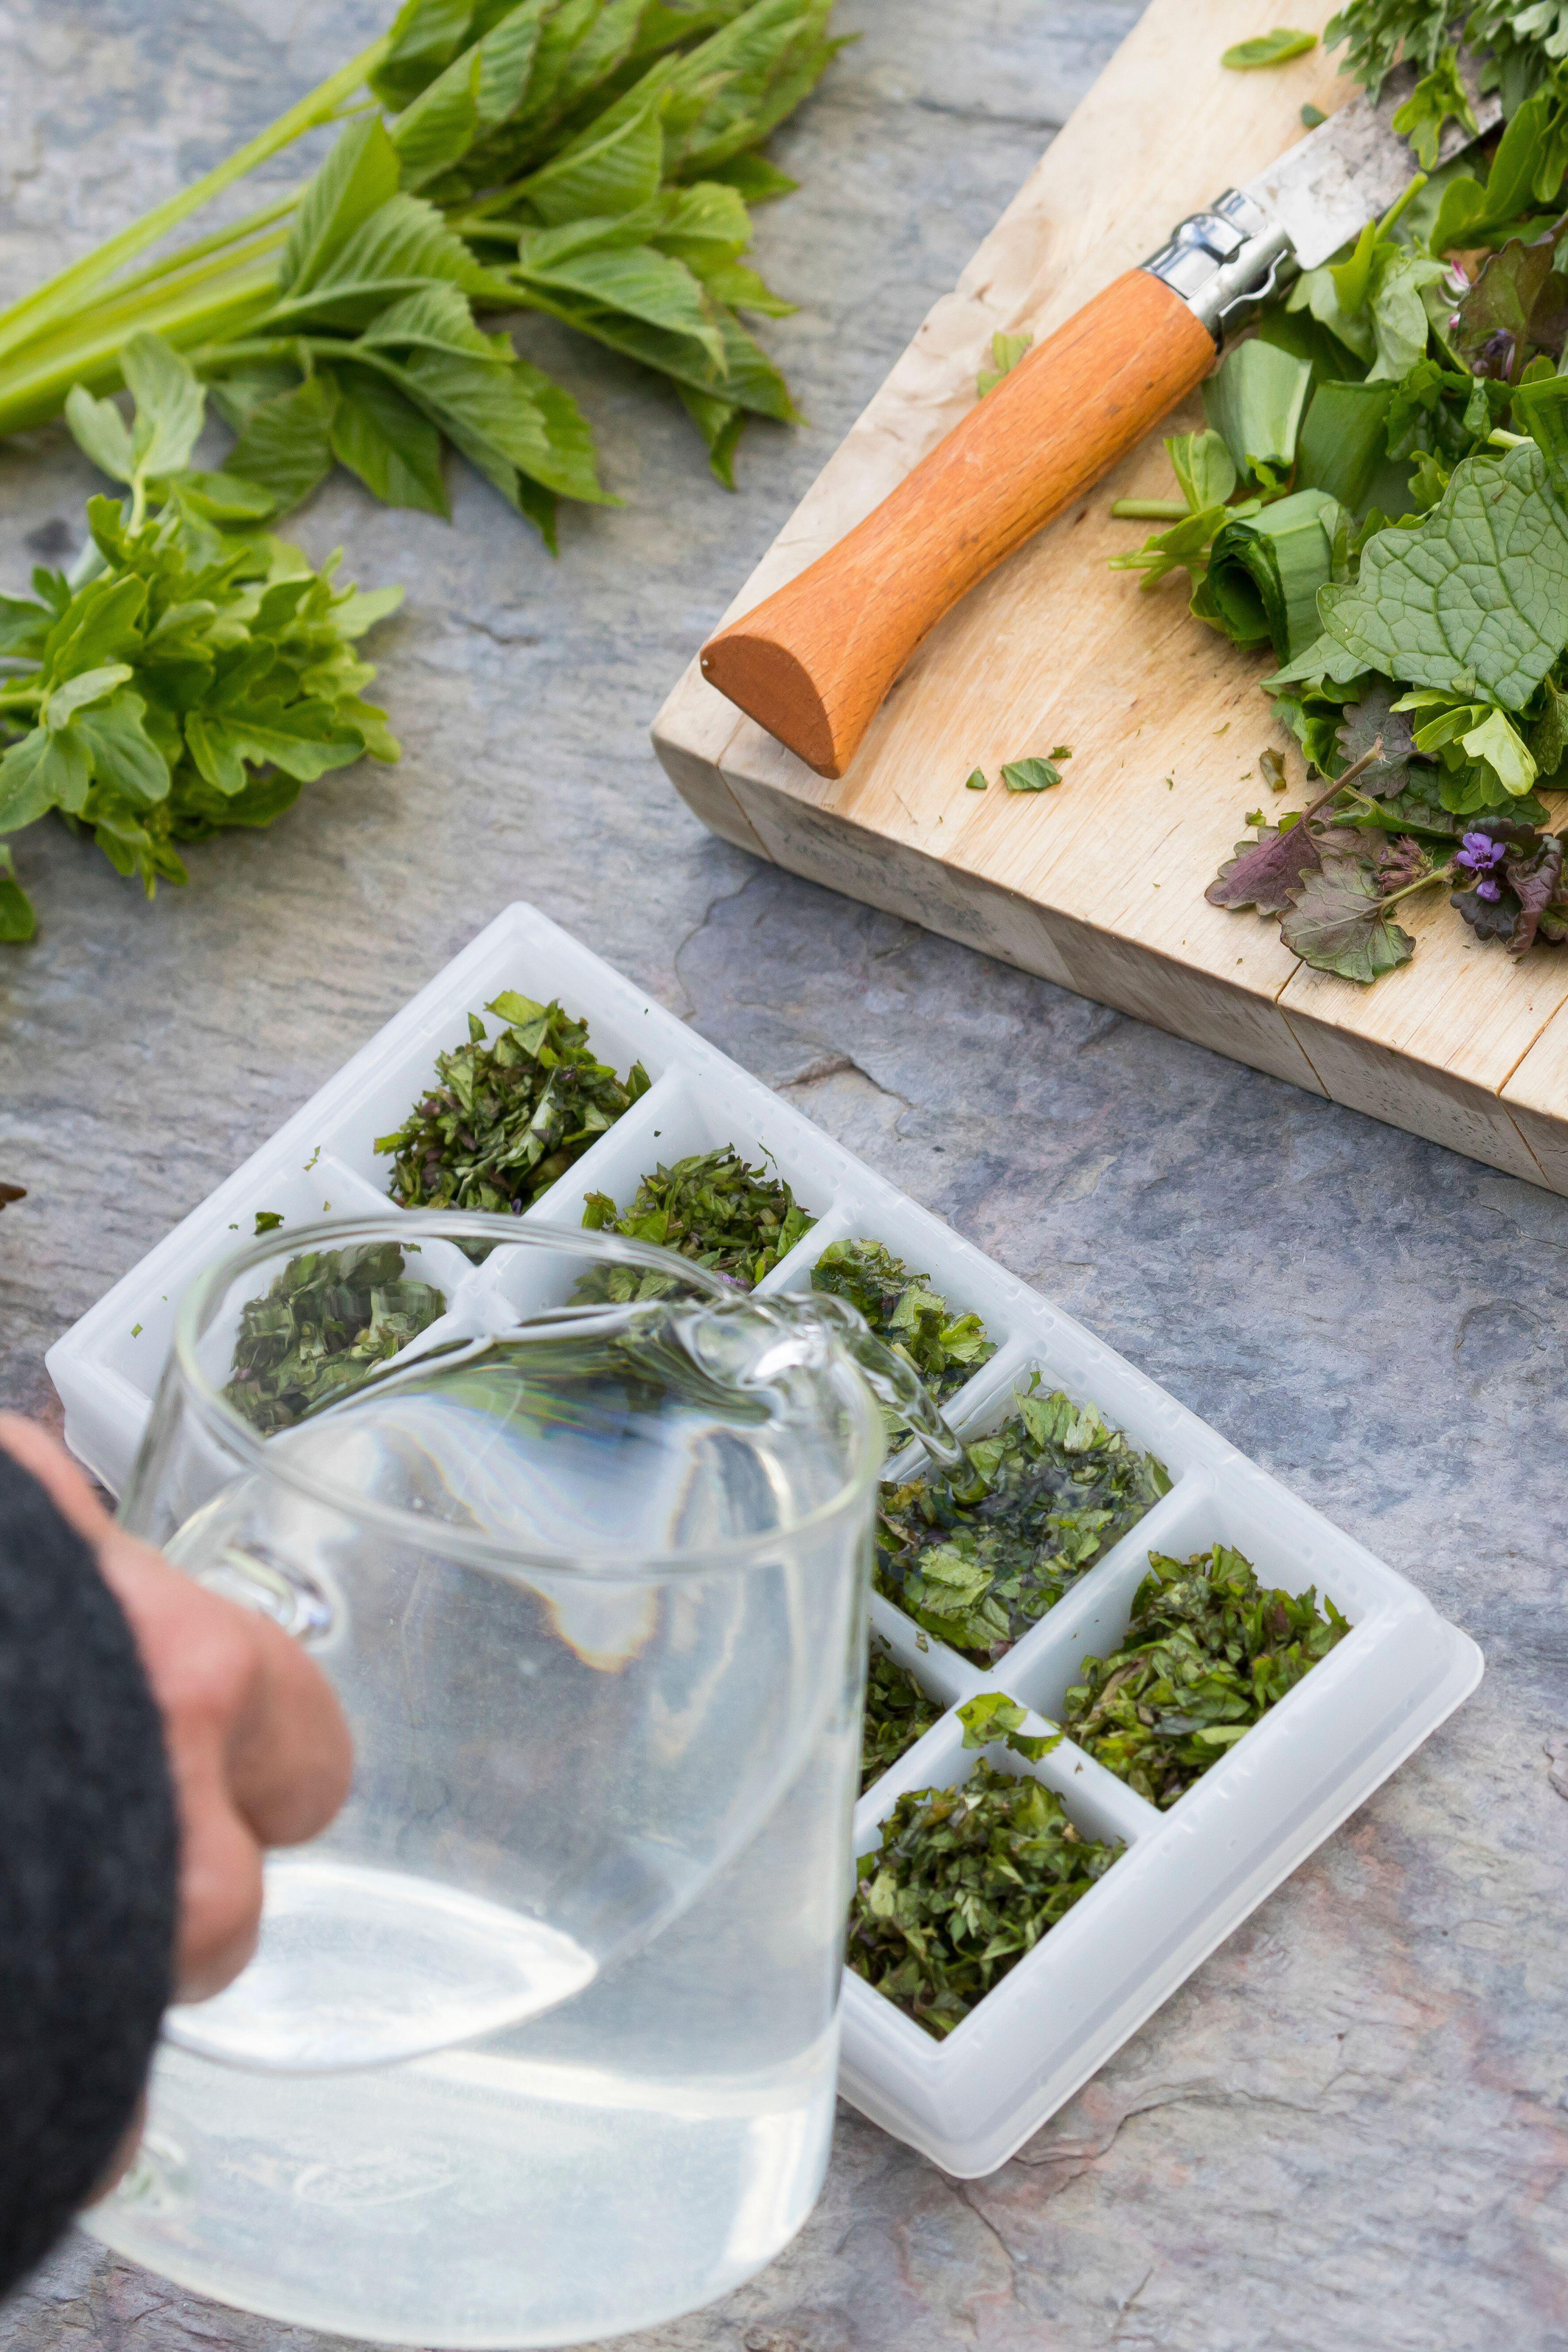 Herbs in ice cube trays (Alamy/PA)